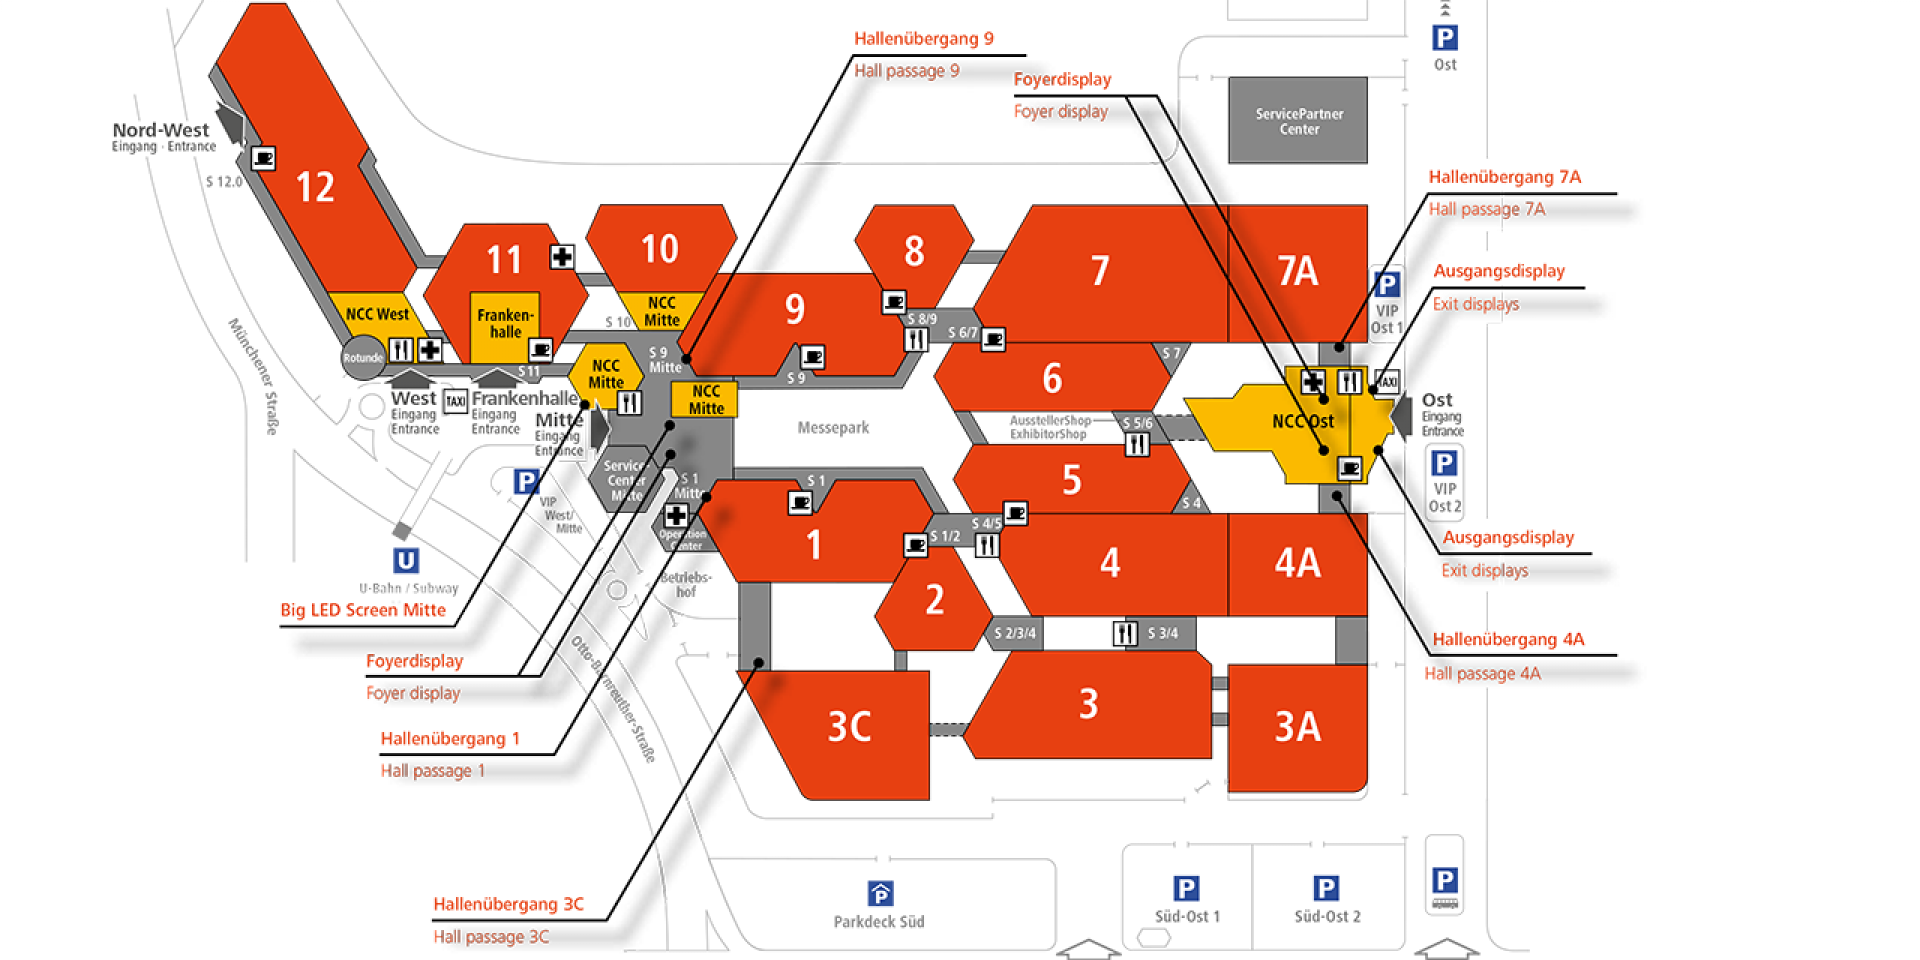 Map with the locations of the Digital Signage Displays of NürnbergMesse